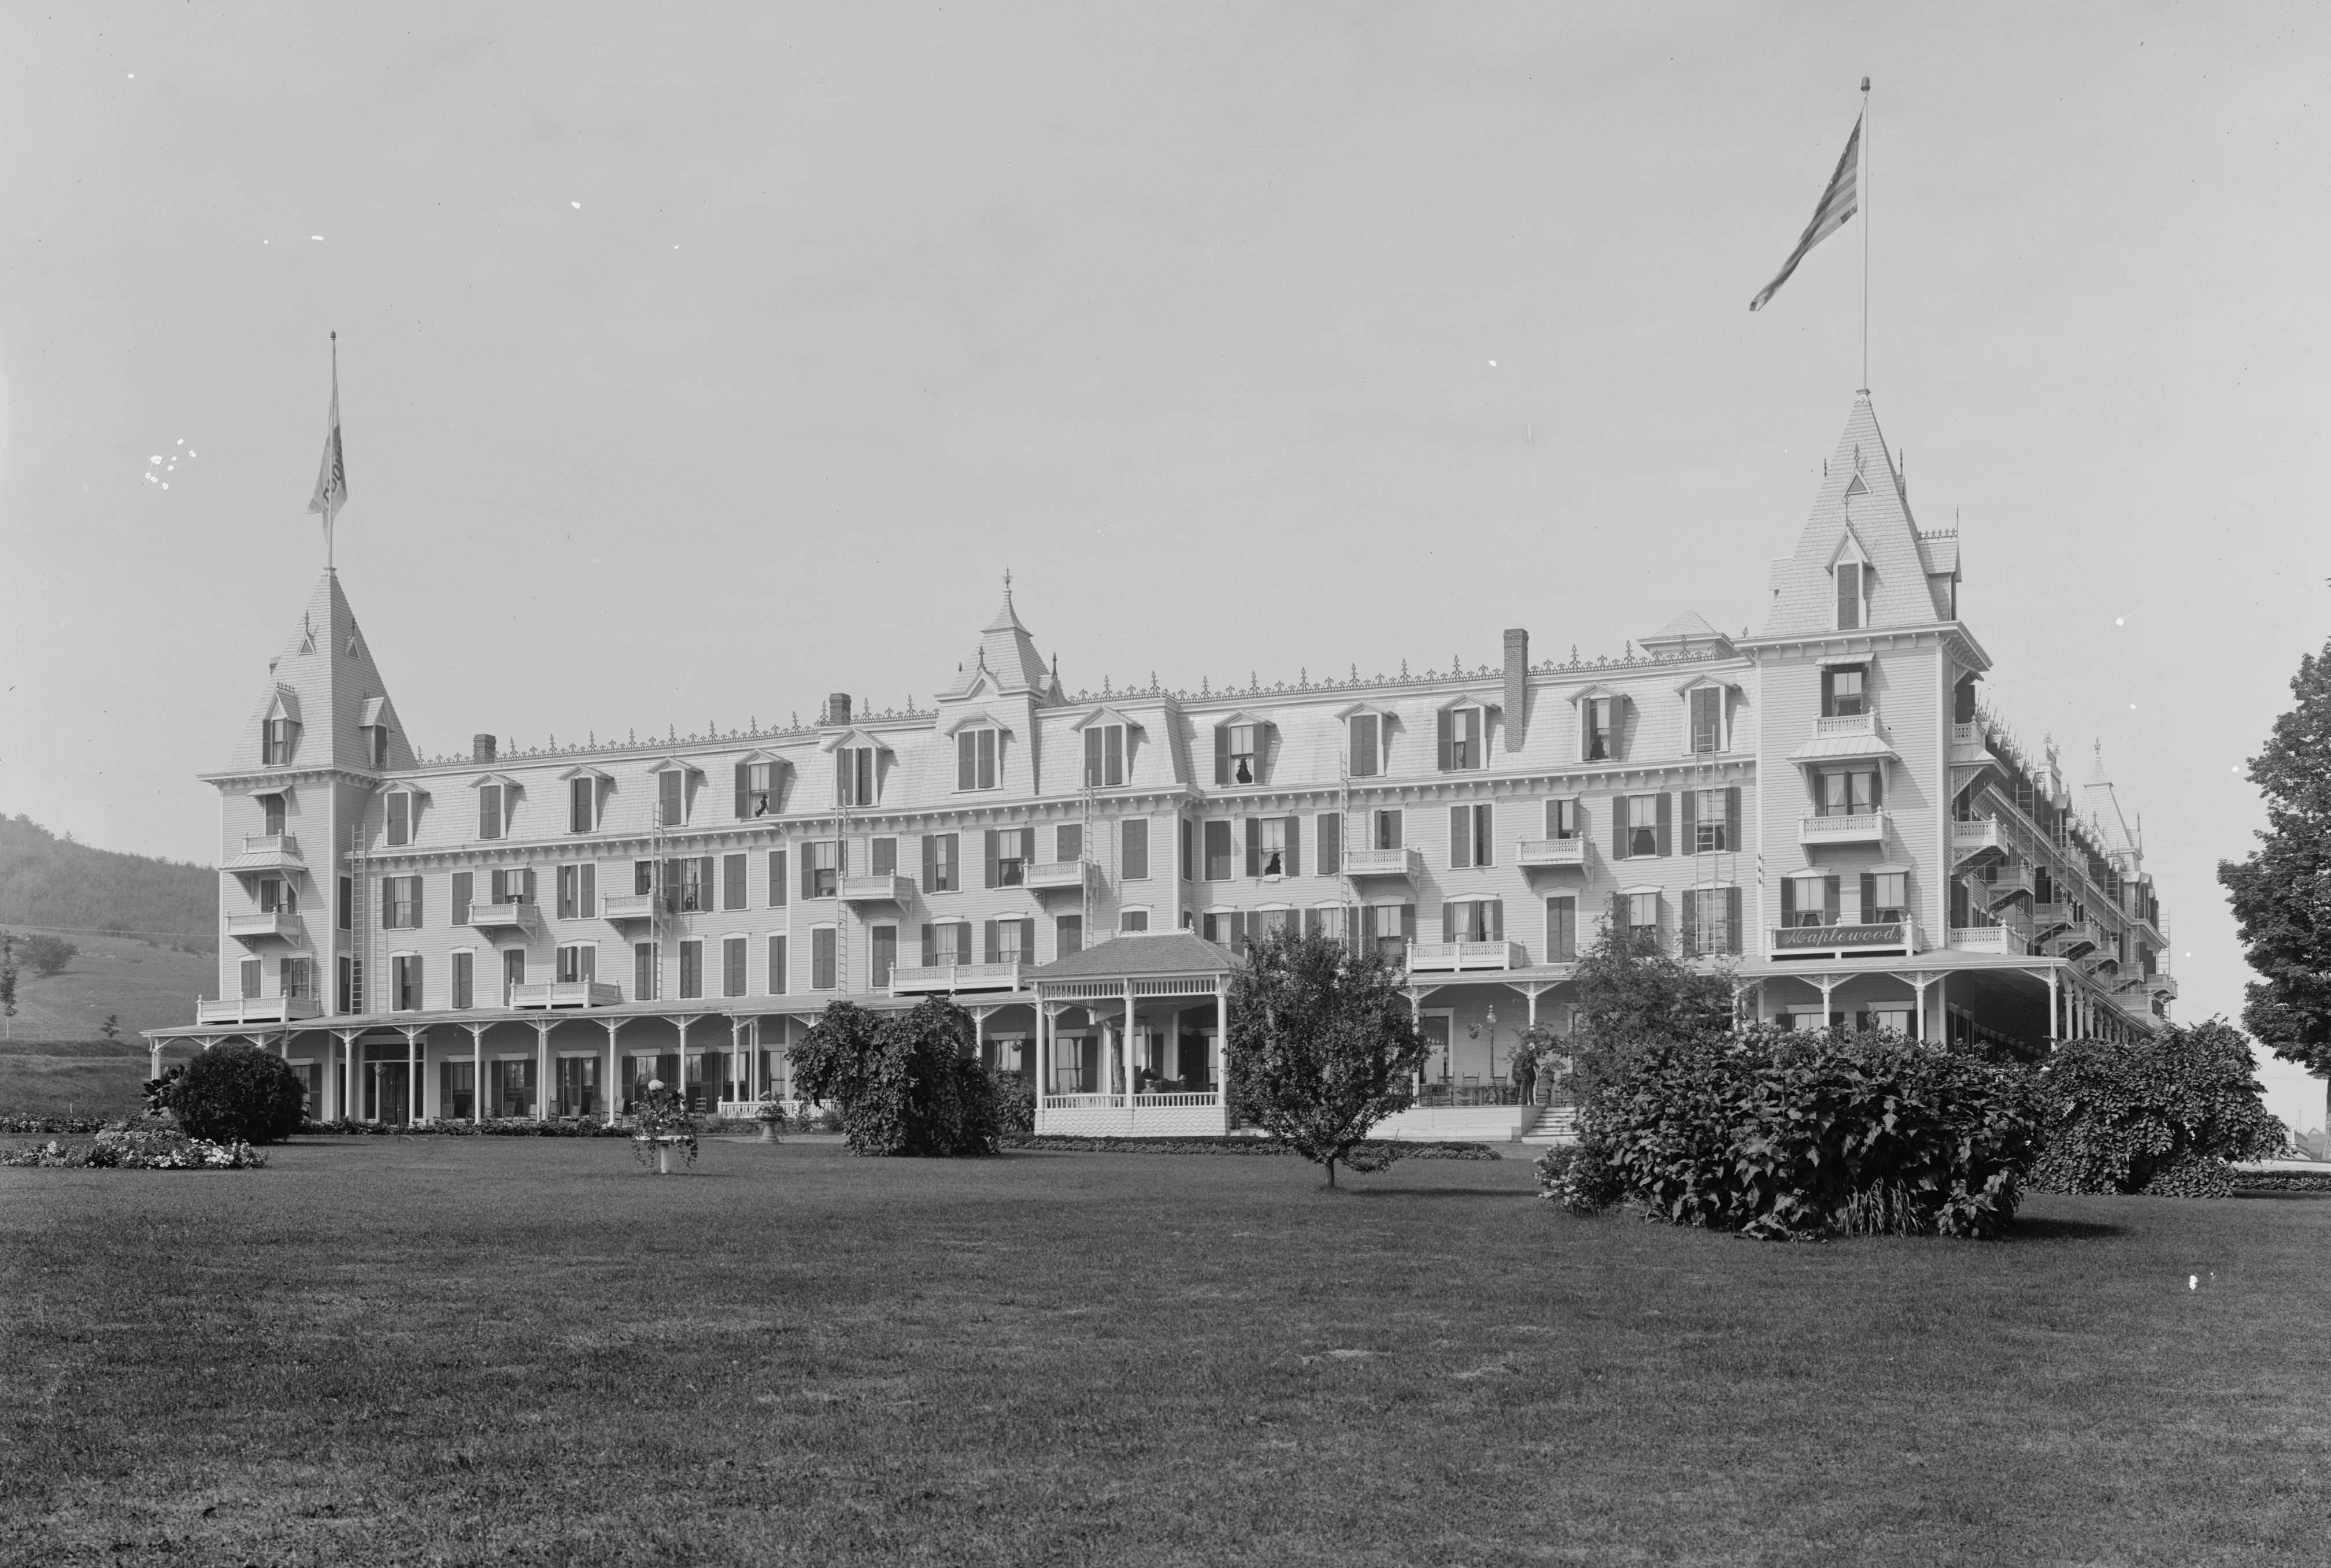 This 1901 view of the Maplewood shows the grandeur of the hotel. This was one of several buildings on the property. Courtesy of the Library of Congress.